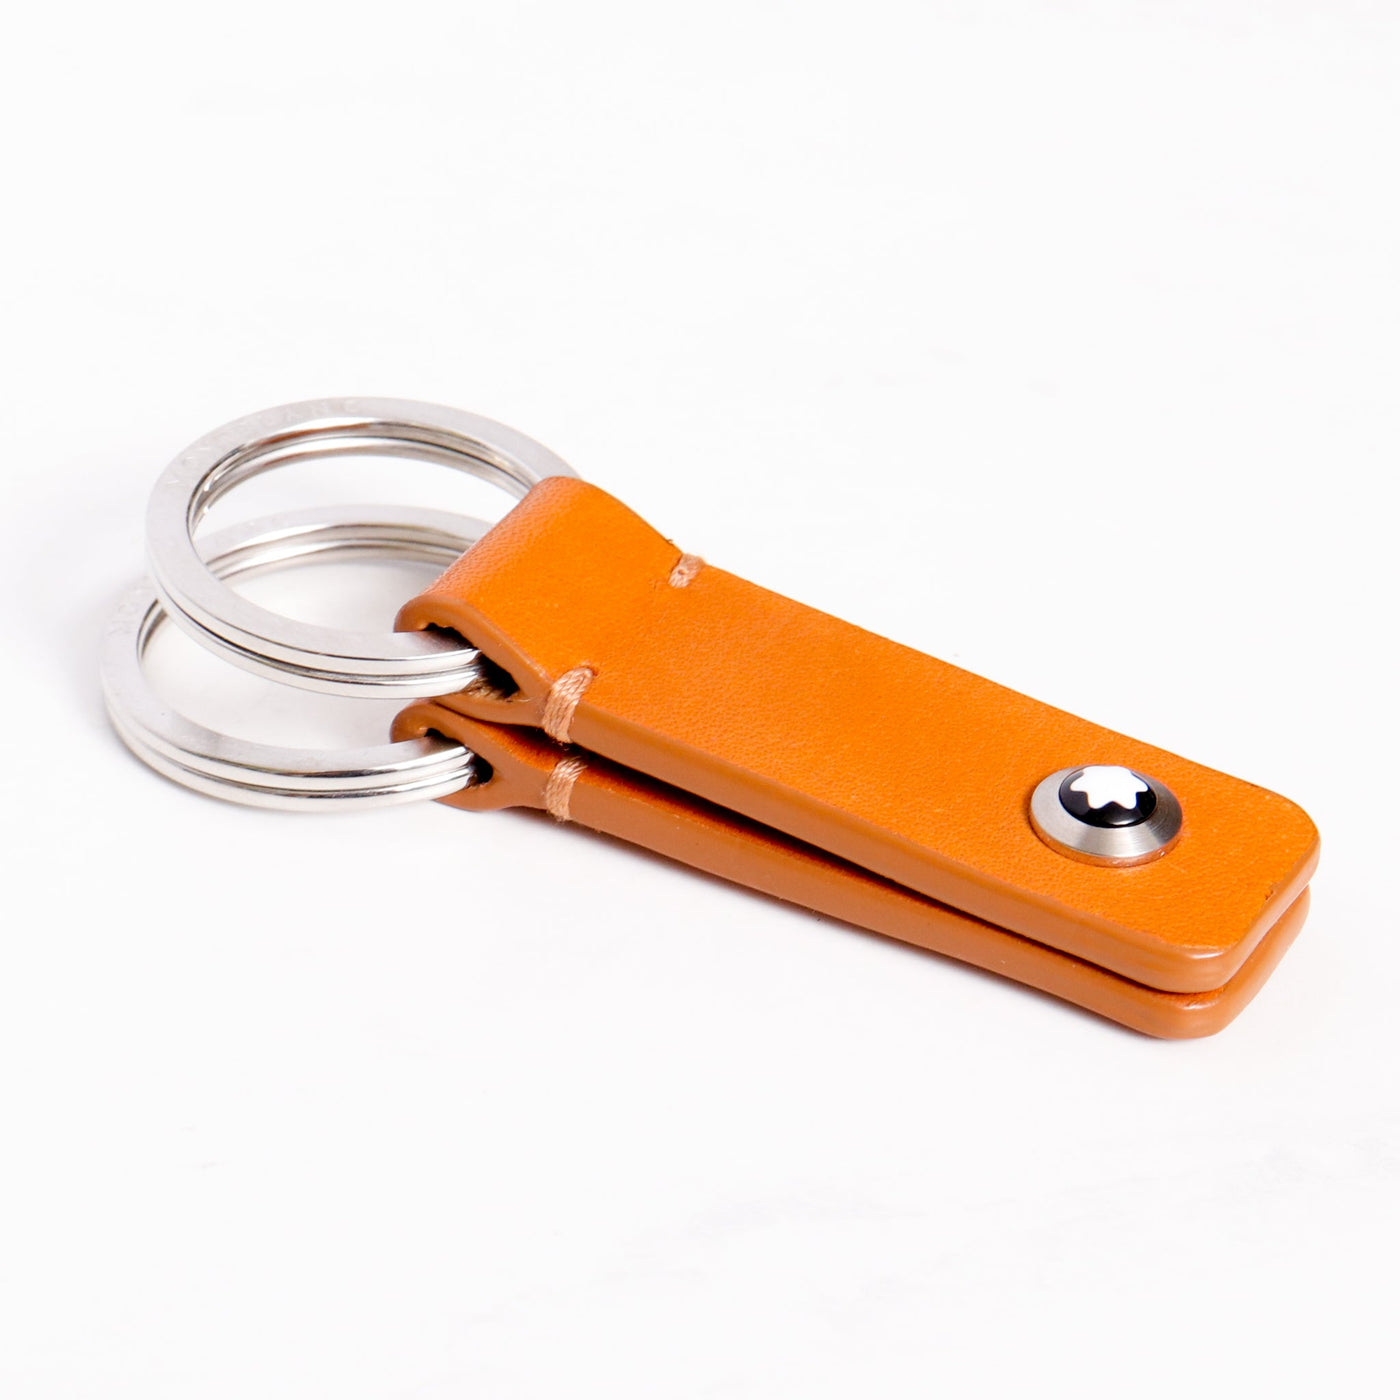 montblanc Solitaire Meisterstuck keychain gold plated Key ring